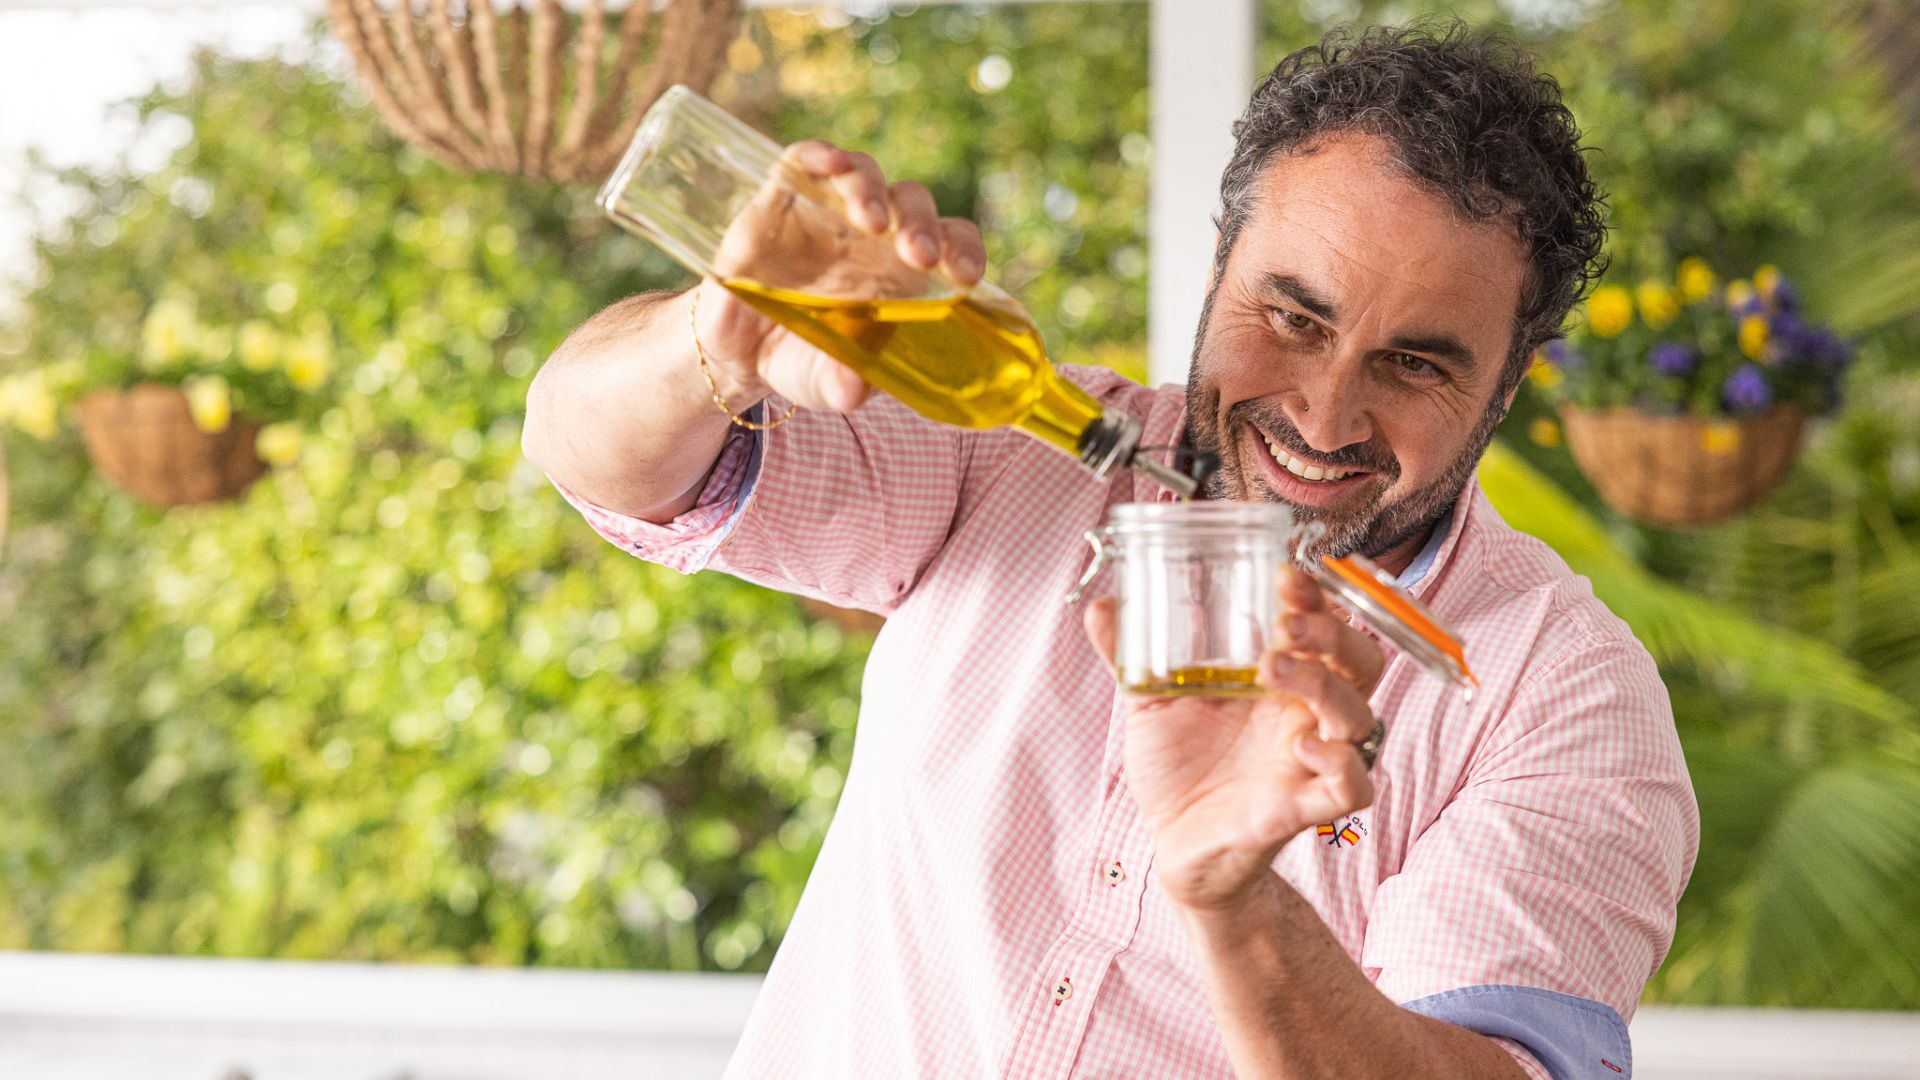 Making friends with salad: Miguel Maestre’s must have salad dressing